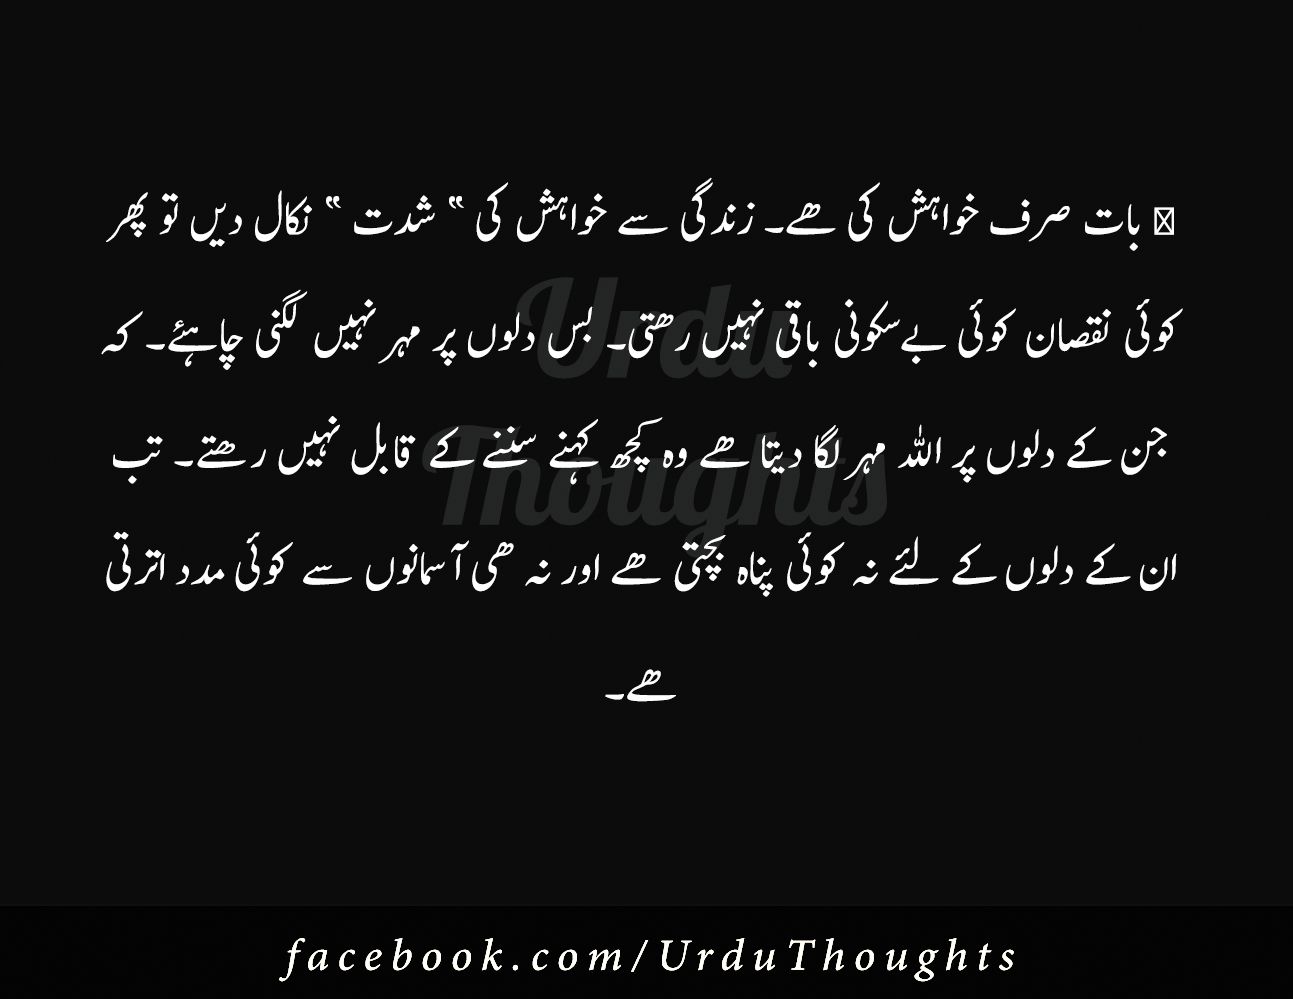 Urdu Thoughts Best Quotes Black Background Image